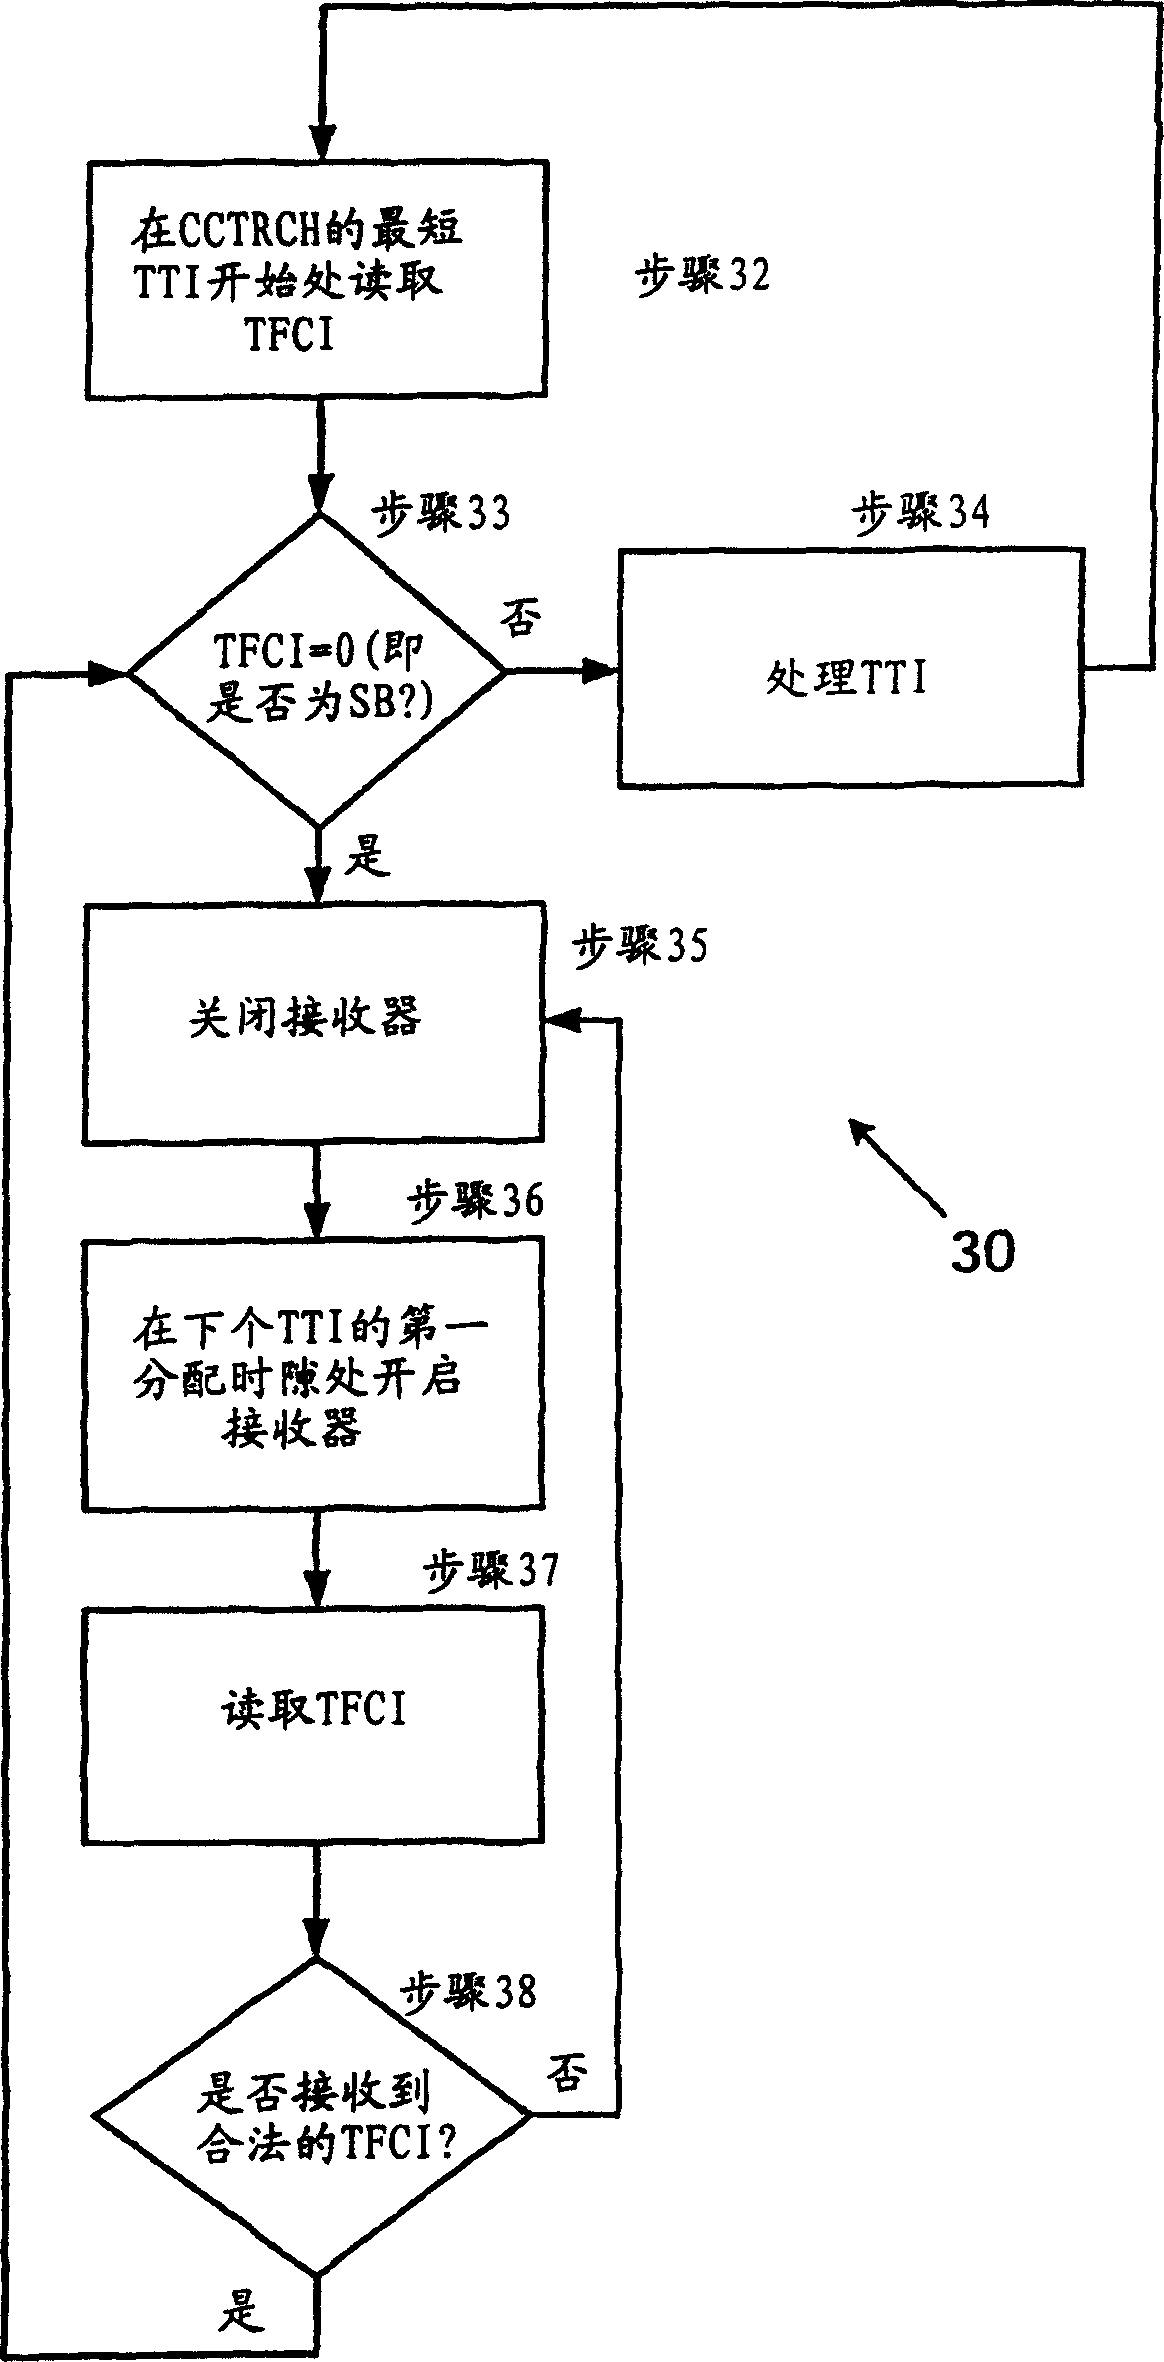 User equipment having improved power savings during full and partial dtx modes of operation